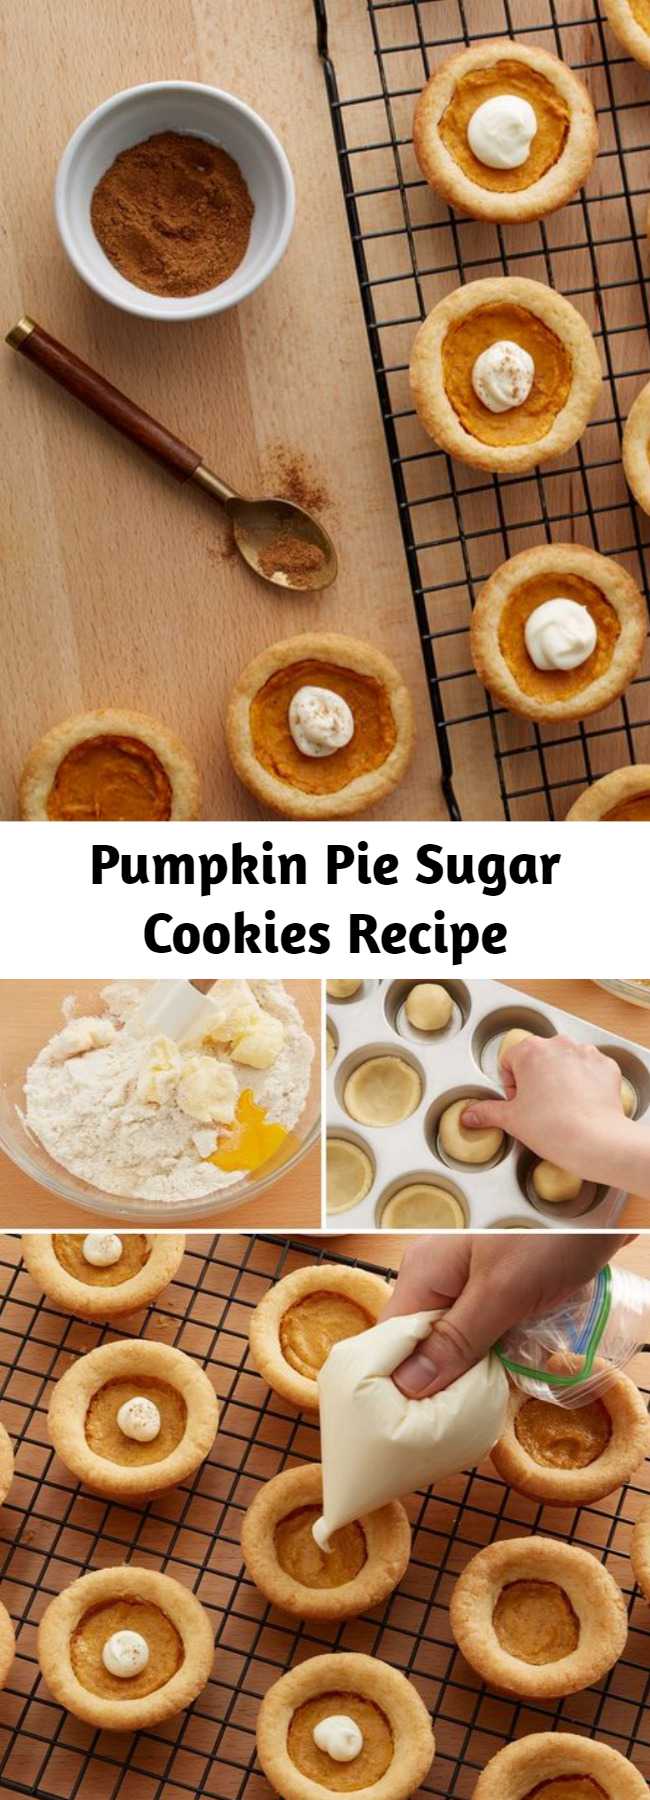 Pumpkin Pie Sugar Cookies Recipe - These too-cute pumpkin pie-inspired sugar cookies are the perfect treat for fall or your Thanksgiving spread. With their sugar cookie crusts and pumpkin pie filling, these petite sweets are perfect for pleasing kiddos, diversifying the dessert spread and cutting down on the labor-intensive pie-making process.